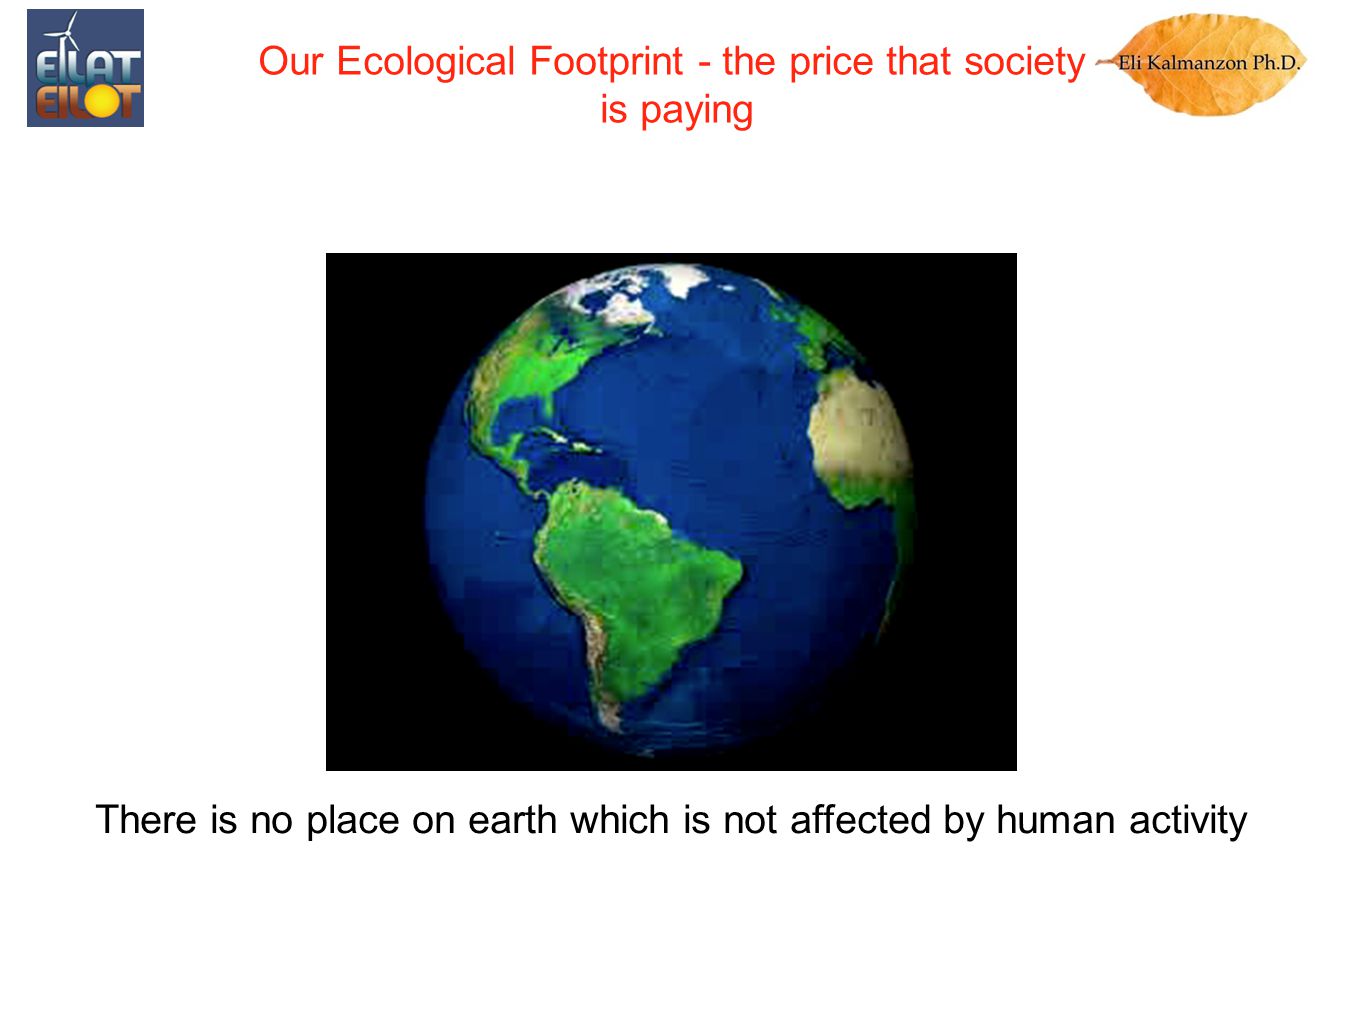 There is no place on earth which is not affected by human activity Our Ecological Footprint - the price that society is paying